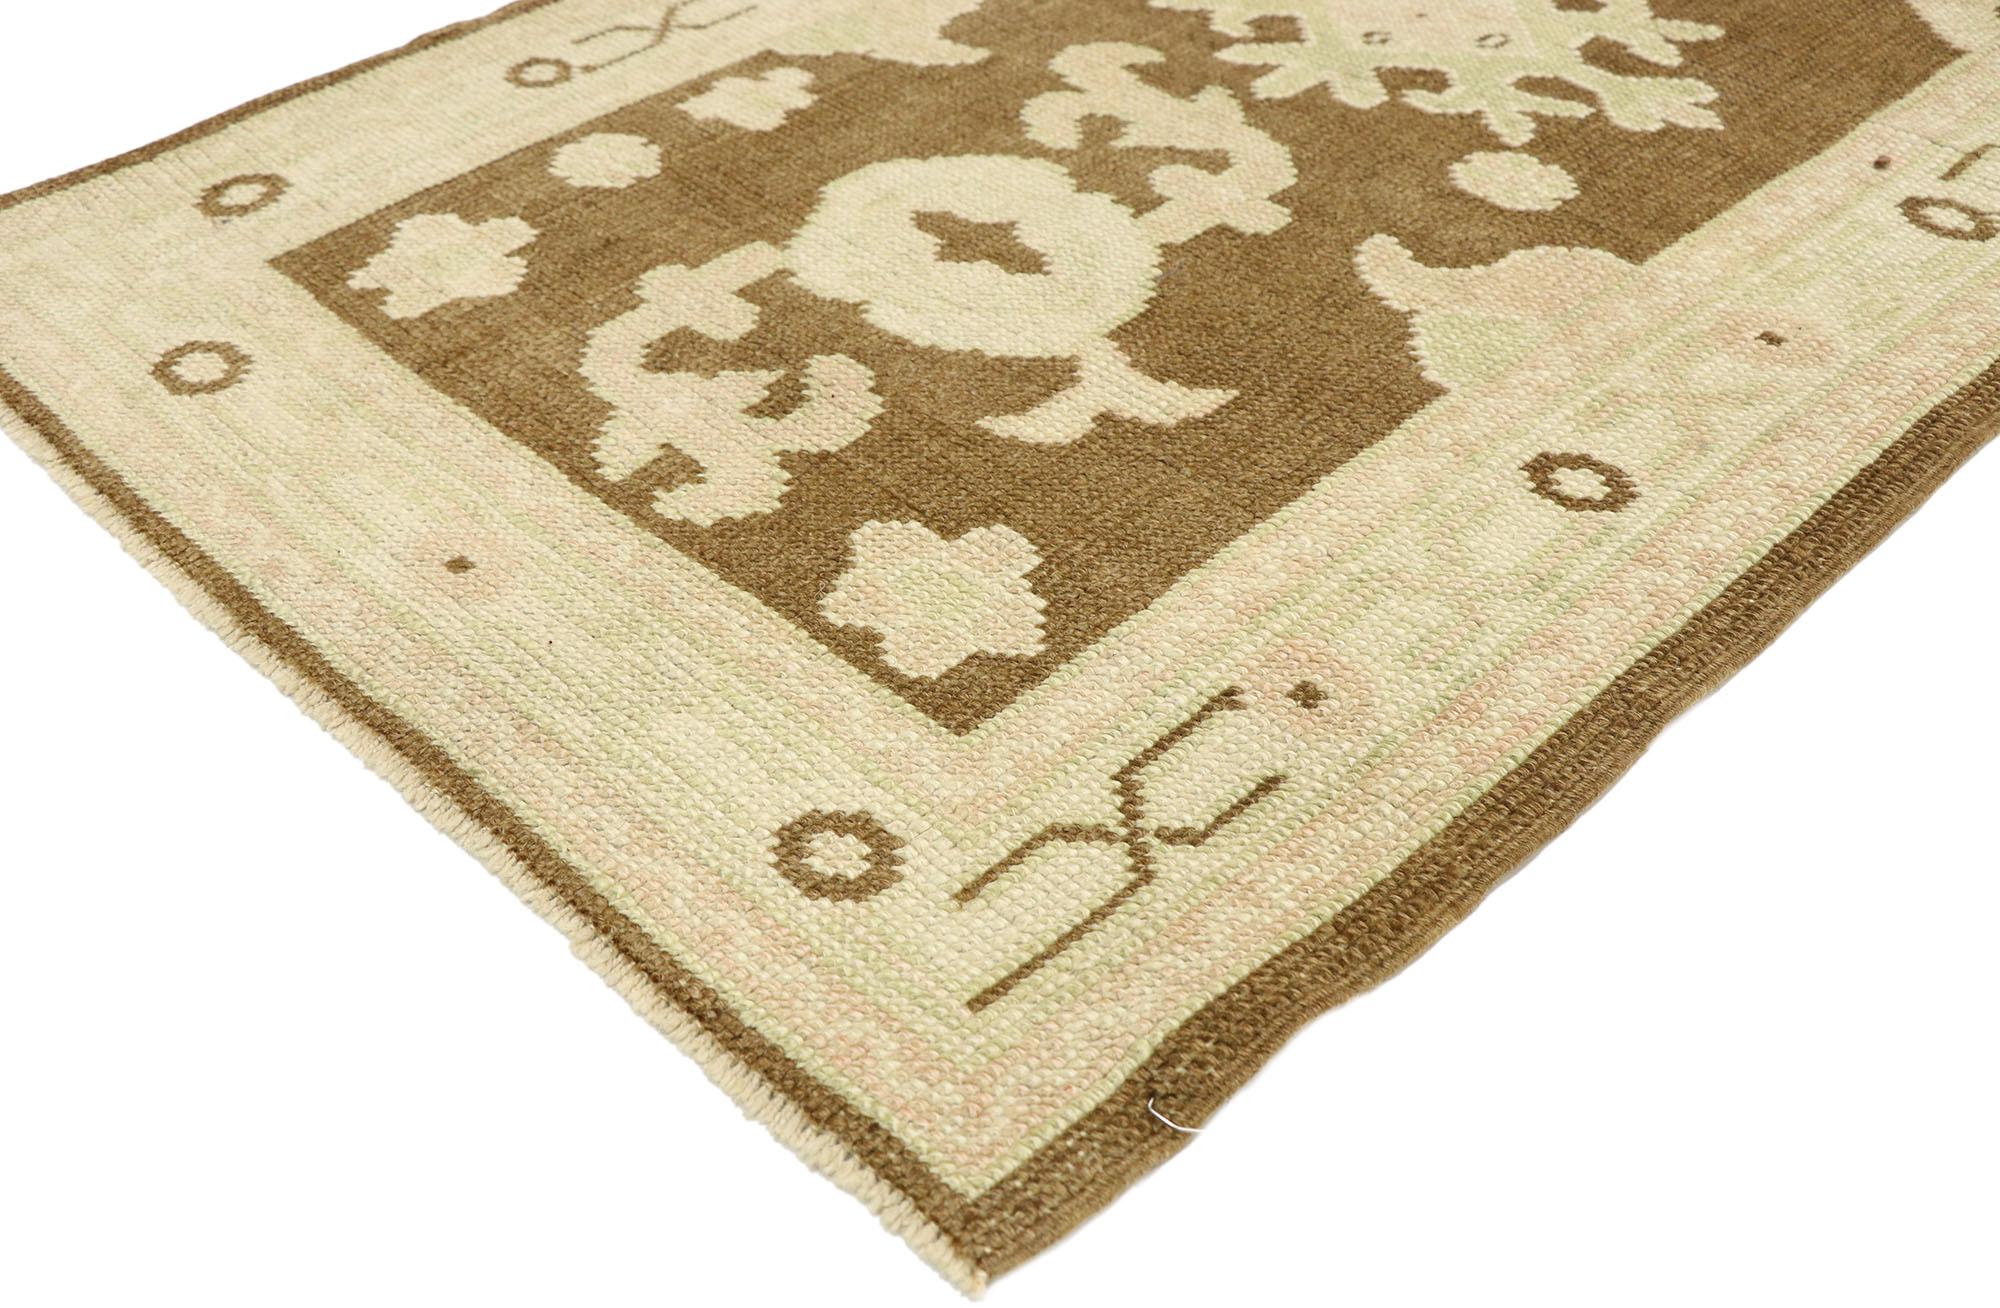 ?52953 New Contemporary Turkish Oushak Runner with Modern Shaker style 02'08 x 10'06.? Emanating sophistication and grace, this hand knotted wool contemporary Turkish Oushak runner provides an elegant and genteel design aesthetic with warm neutral